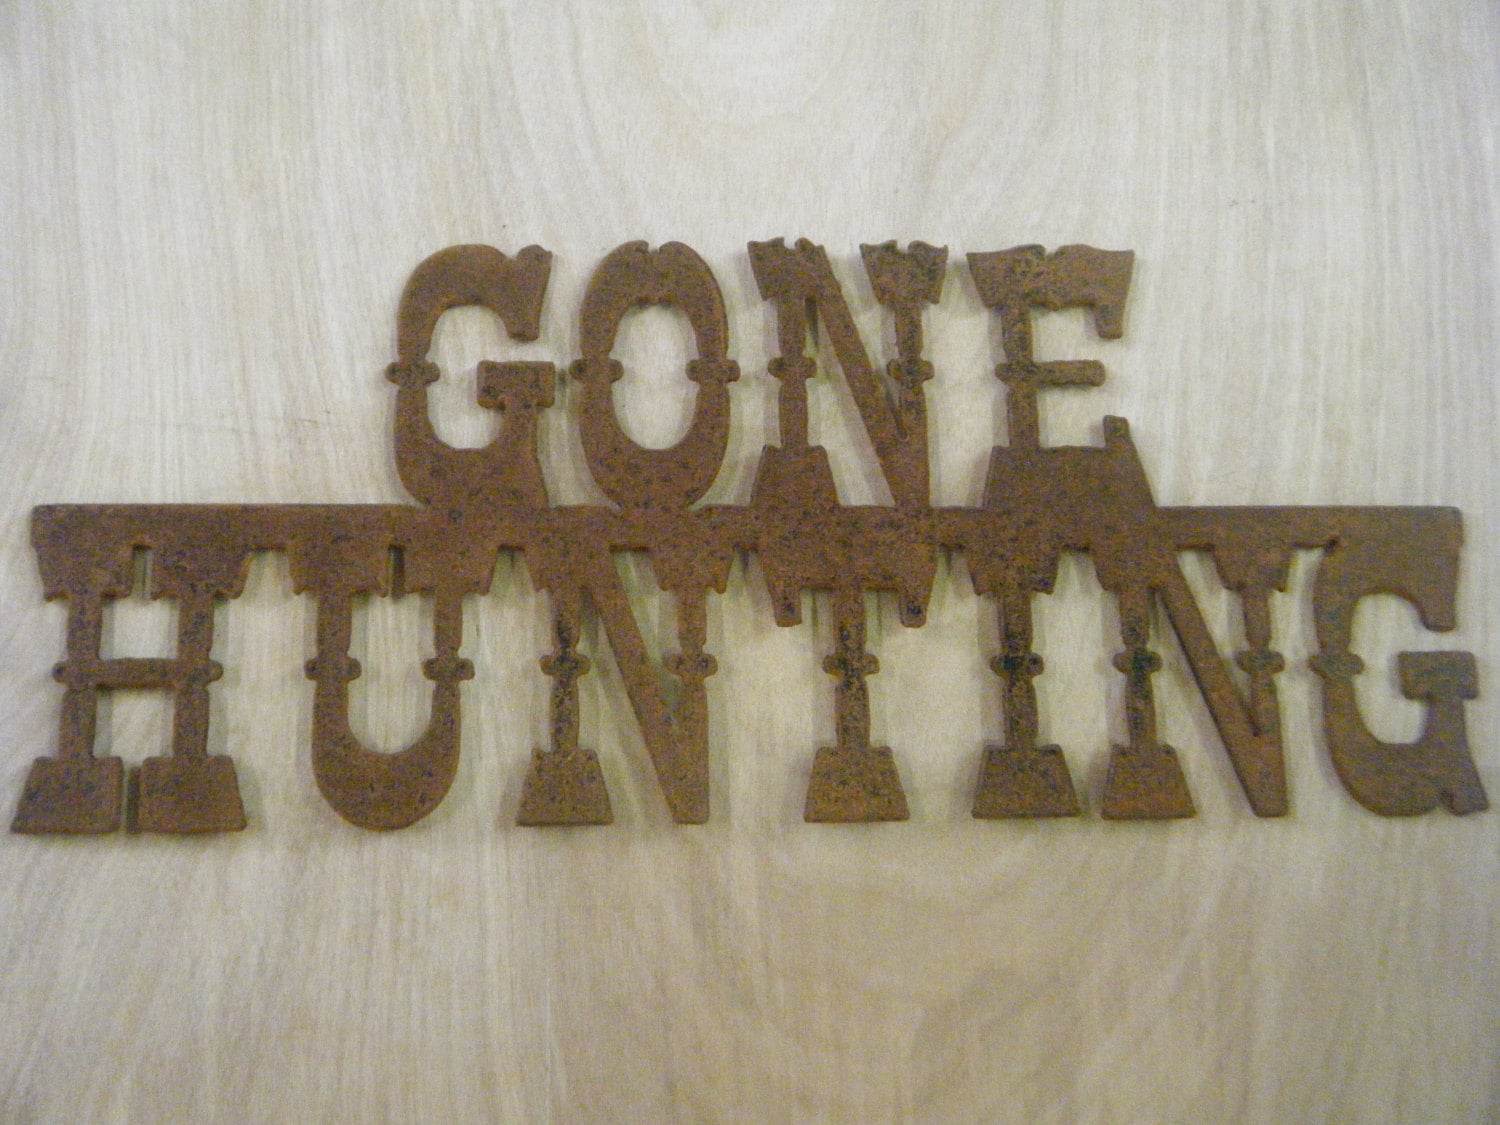 Hunting by RockinBTradingCo Gone hunting SHIPPING FREE rustic Rustic Metal Rusted signs